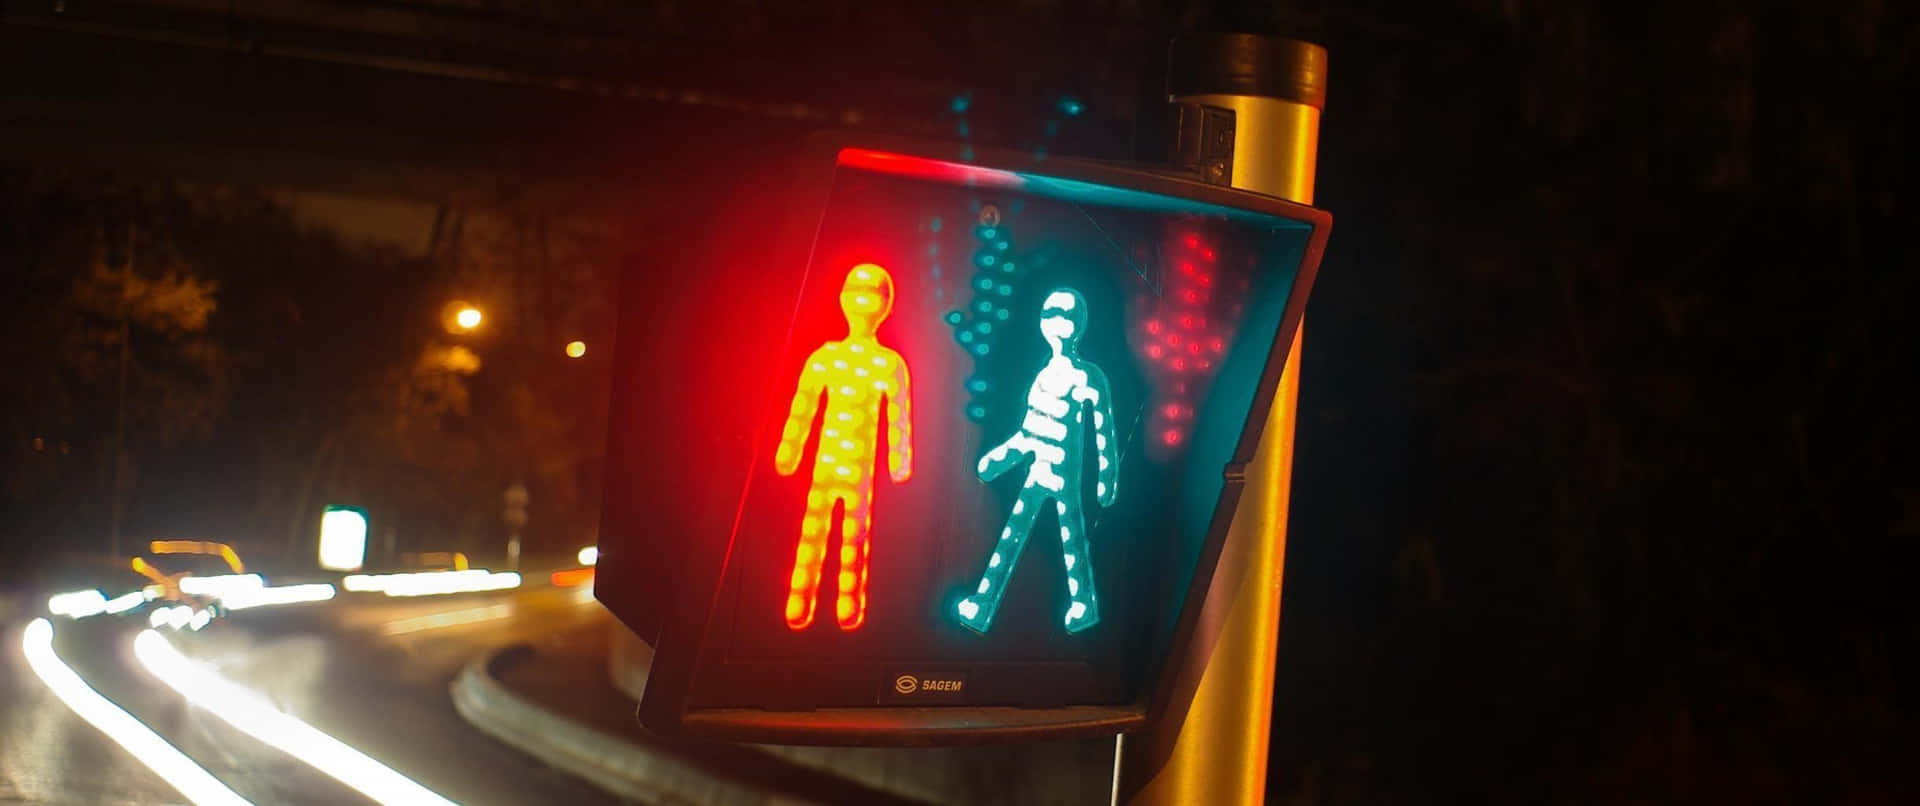 Red Light at an Intersection